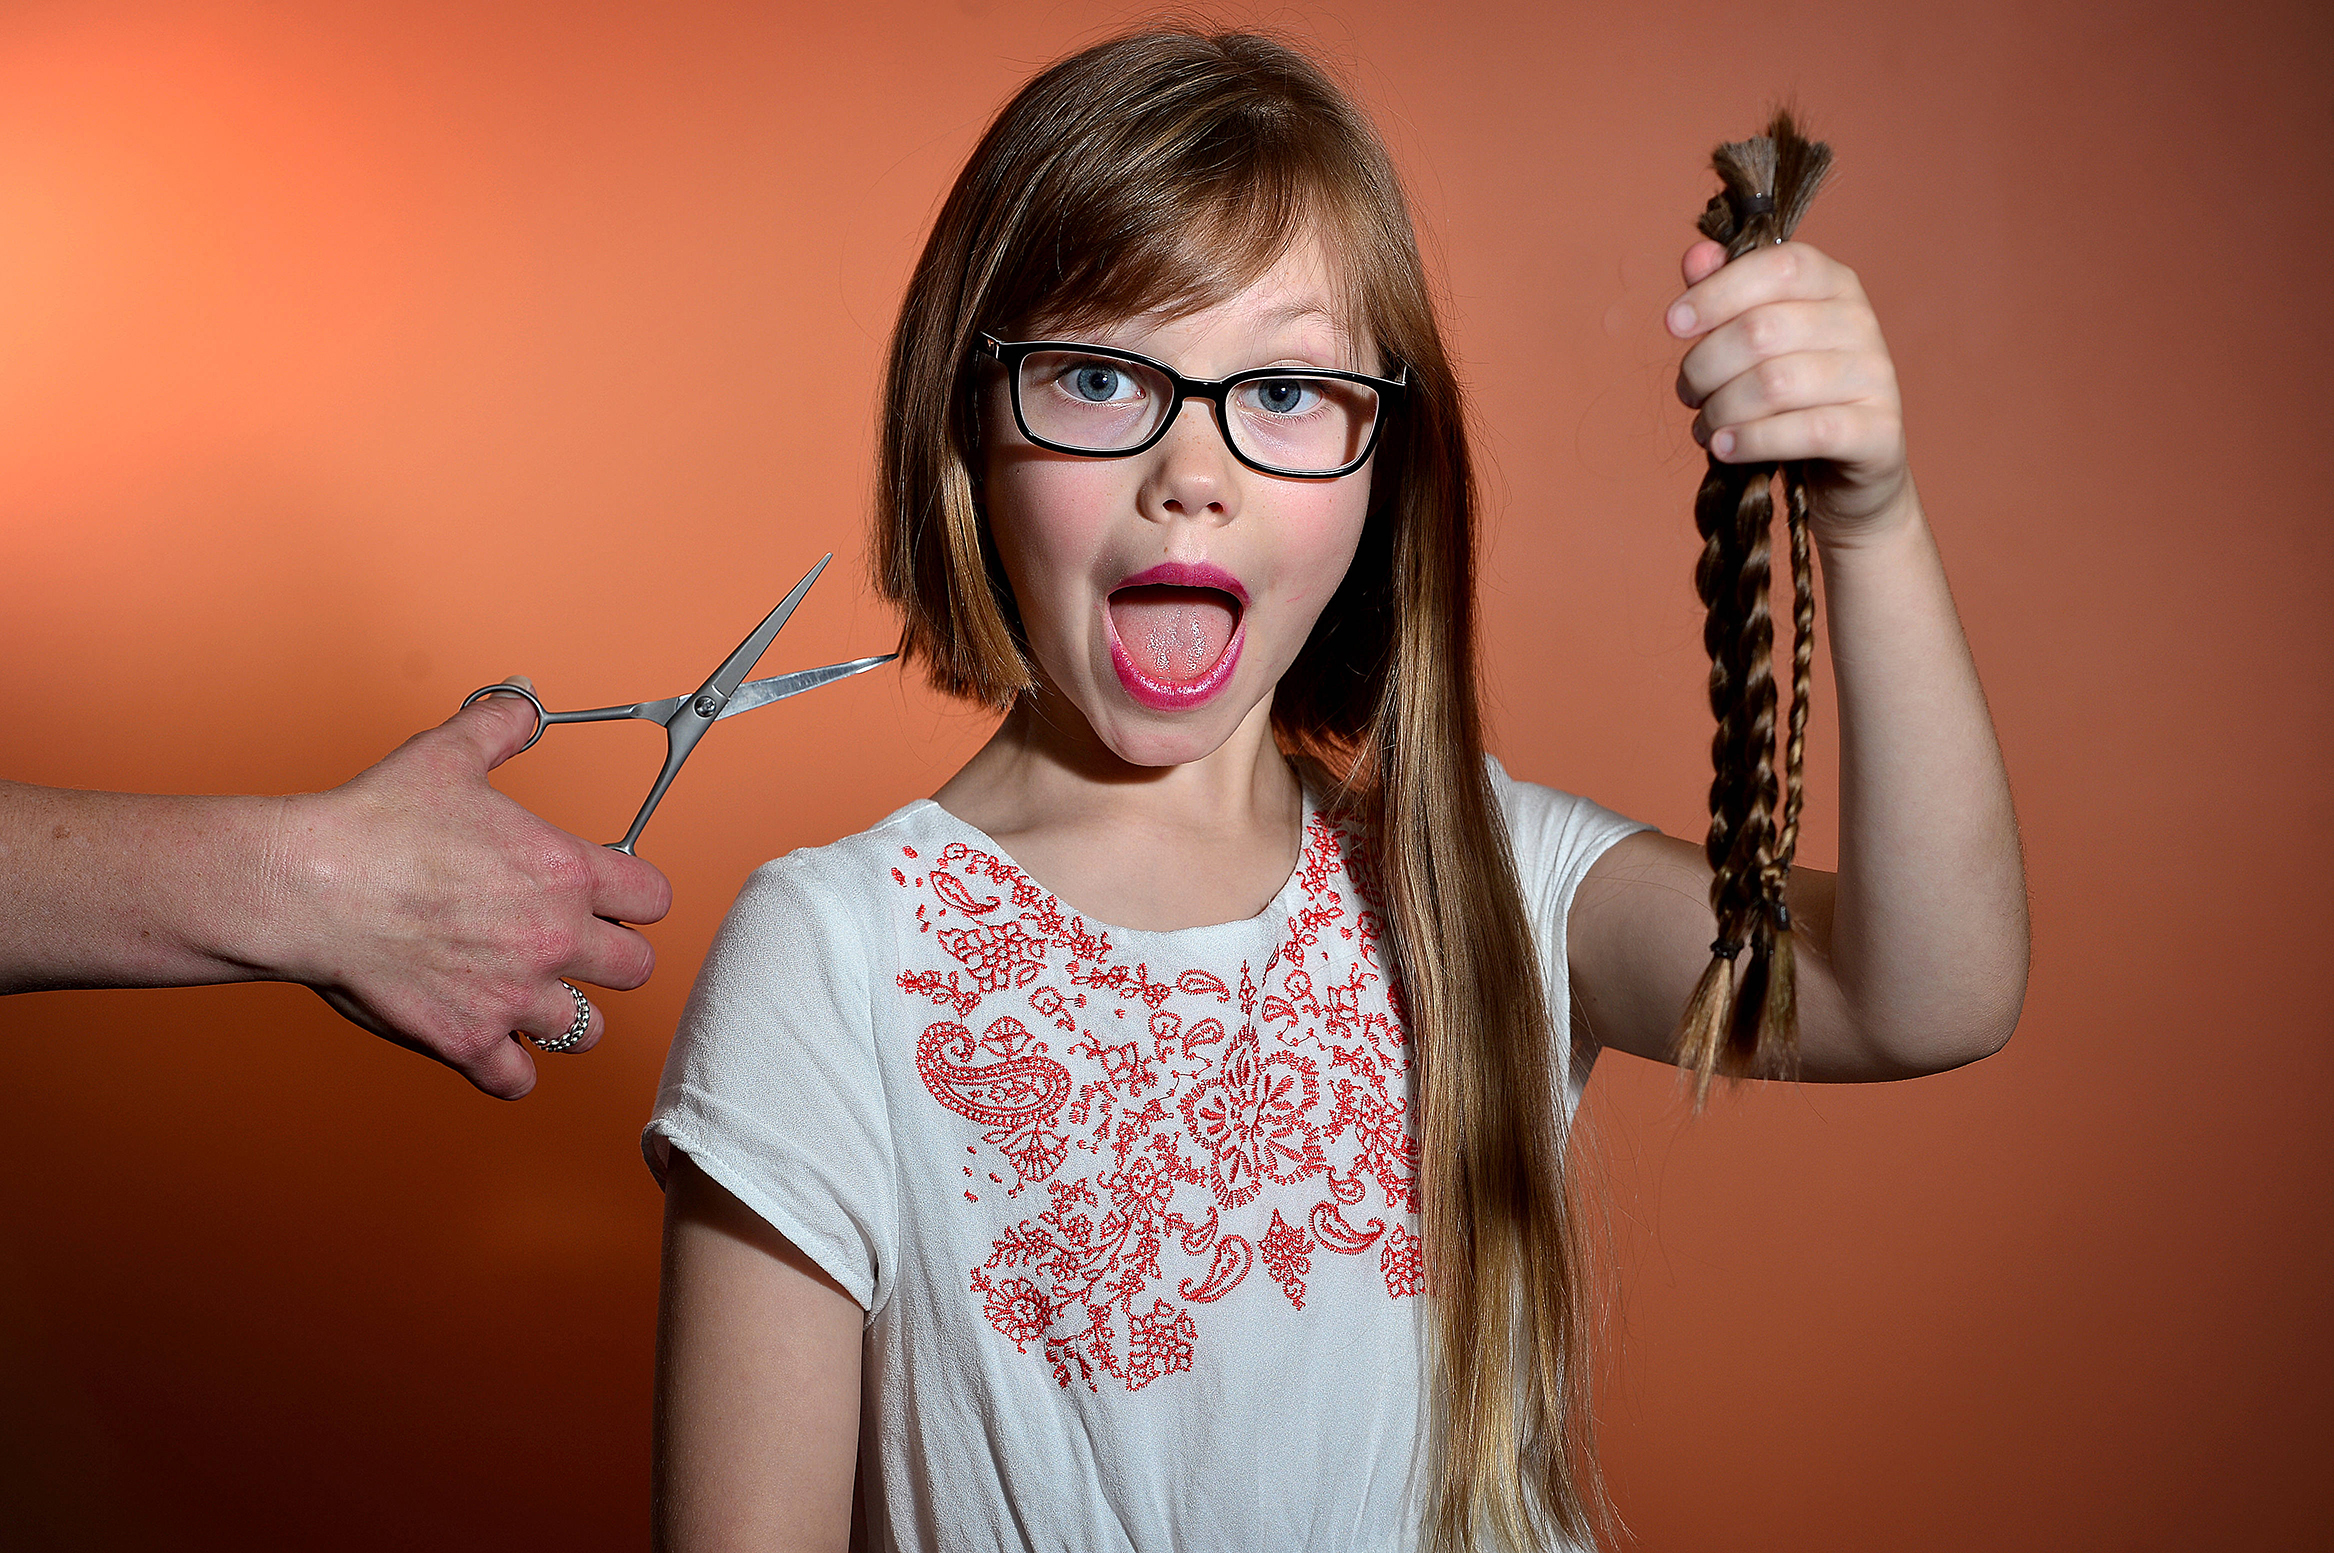 CHP_Export_152927497_8year old Matilda Ebert is cutting most of her hair off as part of World%27s Grea.jpg